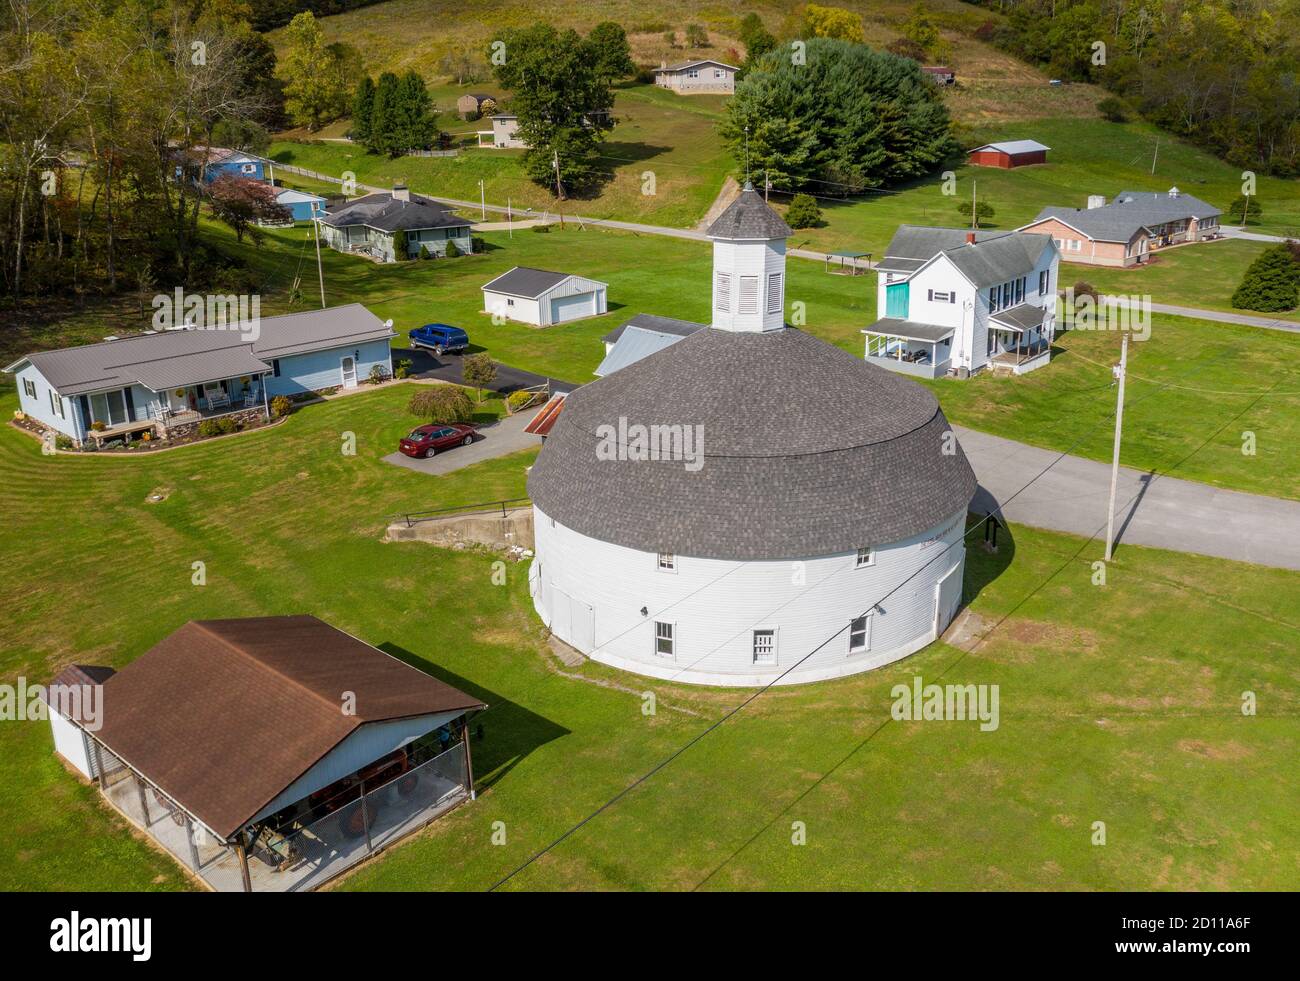 Old Dome Barn High Resolution Stock Photography And Images Alamy